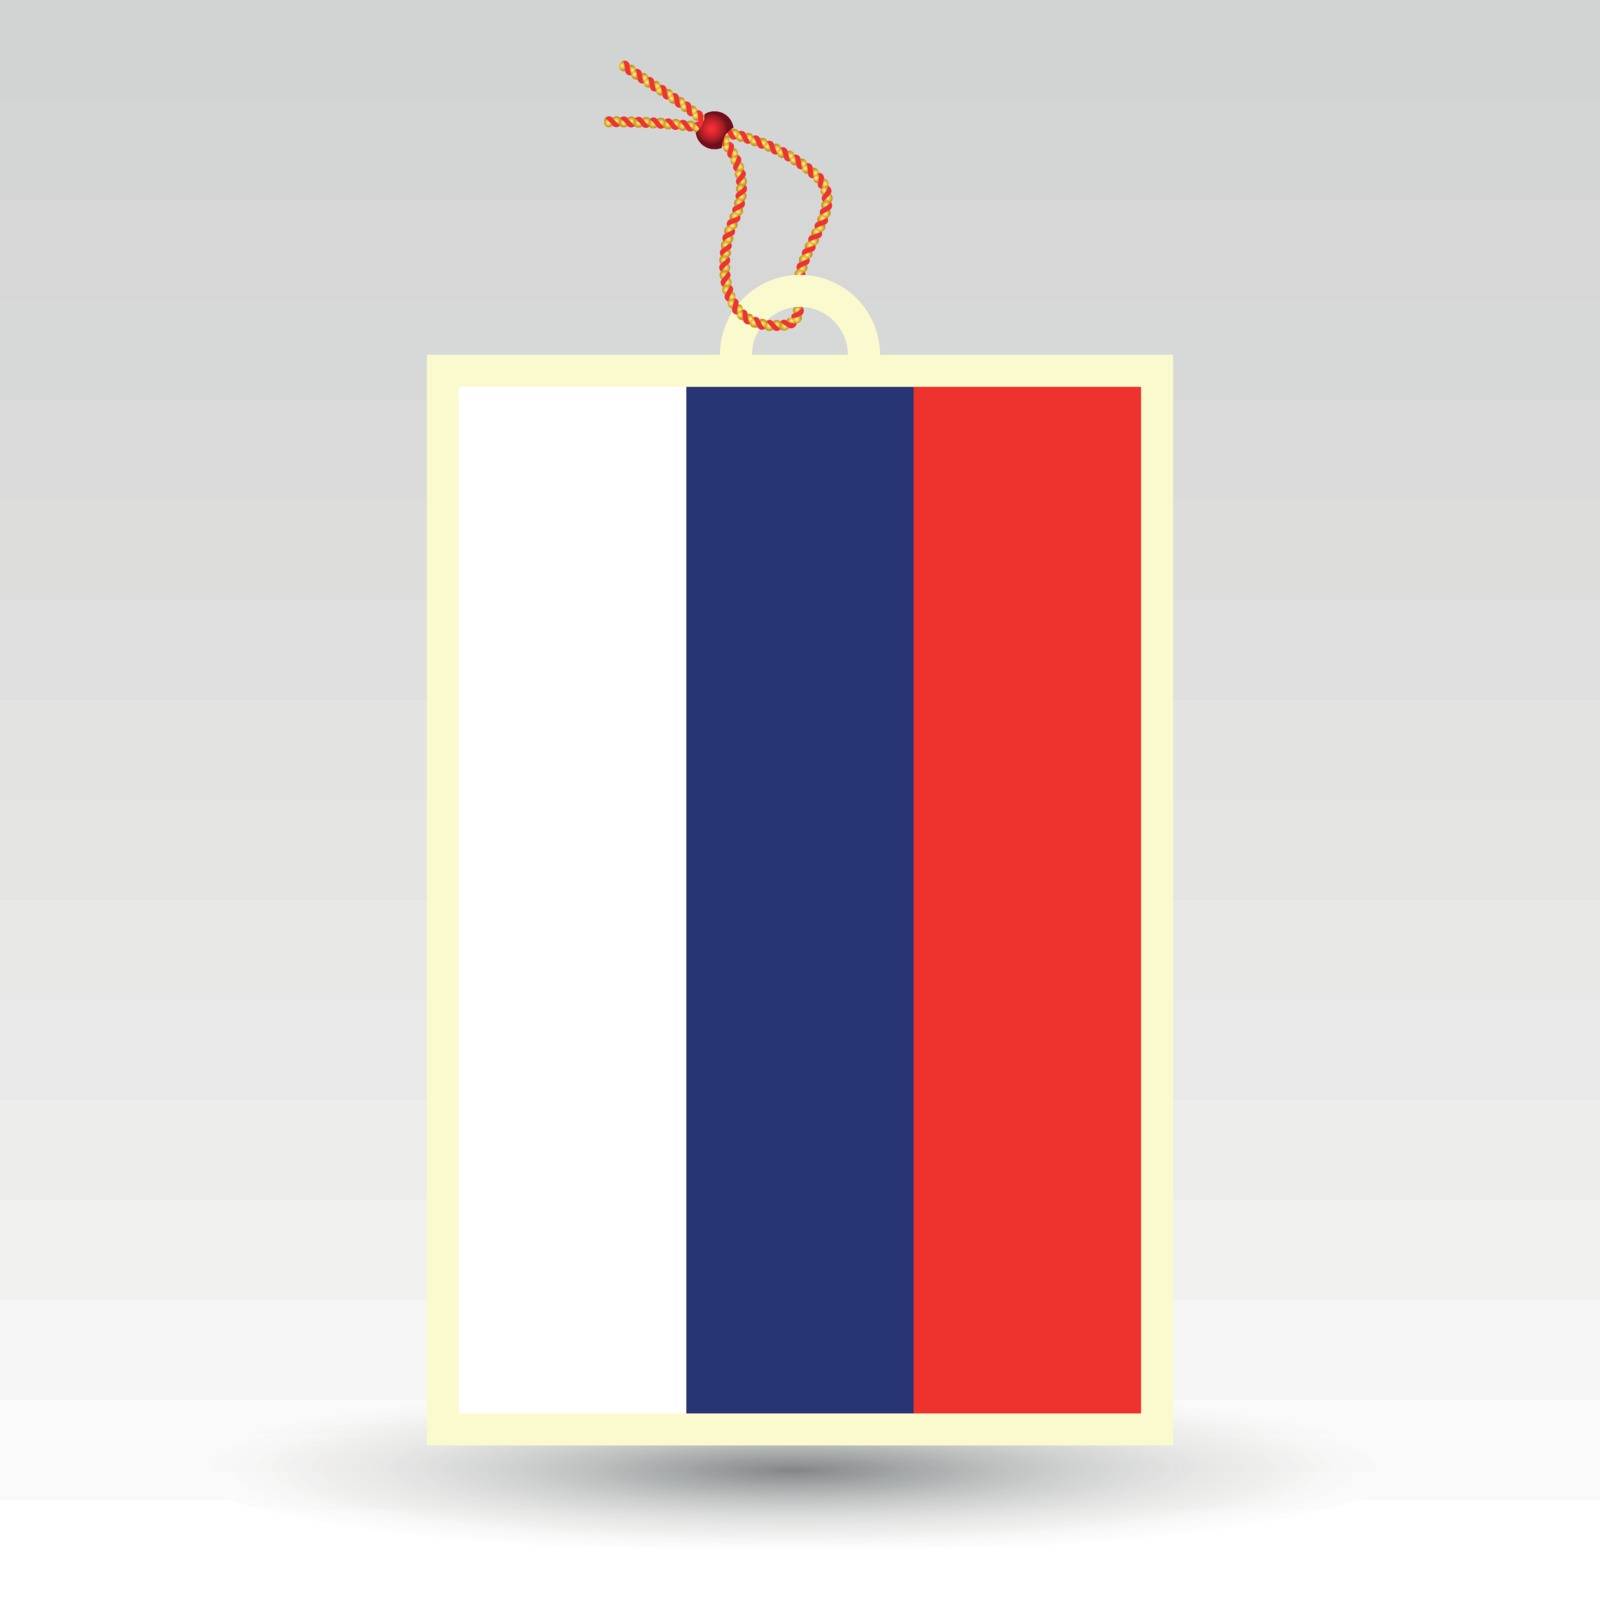 vector simple russian price tag - symbol of made in russia - label with string - national flag pattern